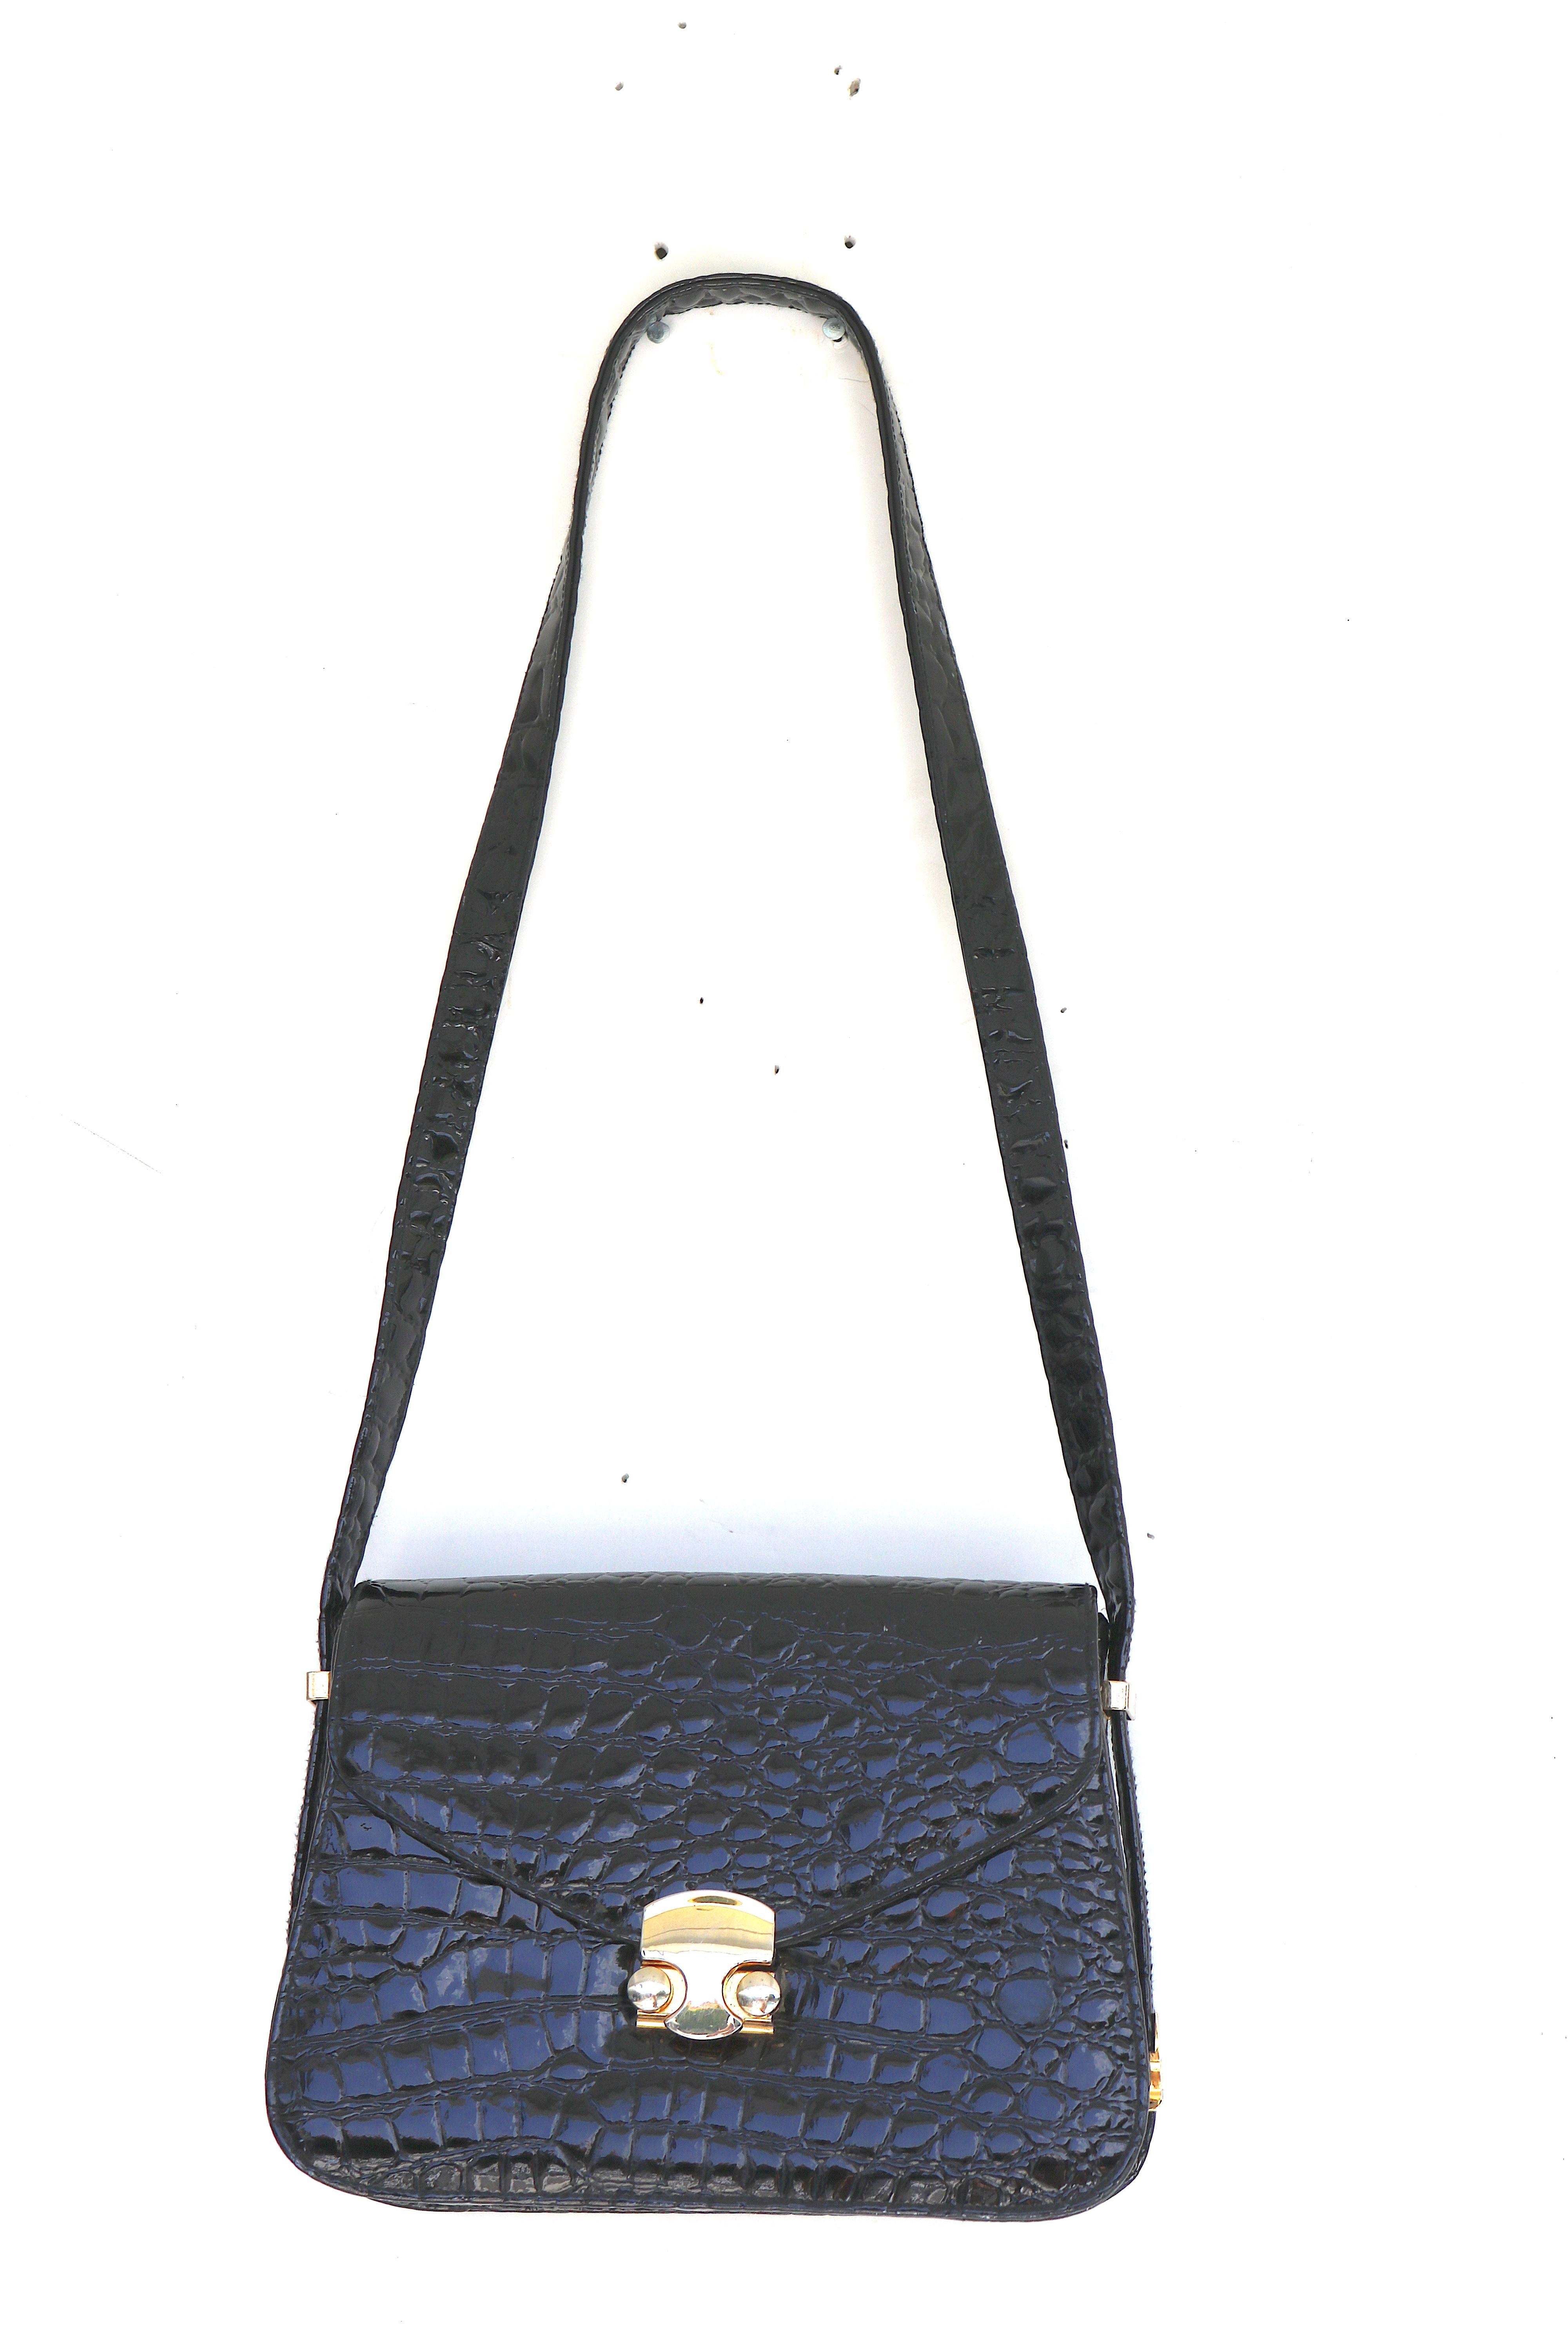 Vintage Gucci Style Sophisticated Lustrous Faux Black Alligator Handbag with a Unique Method of Shortening and Lengthening the Strap- the side hardware disconnects-the two sides meet in the bottom of the bag, creating a short evening appropriate